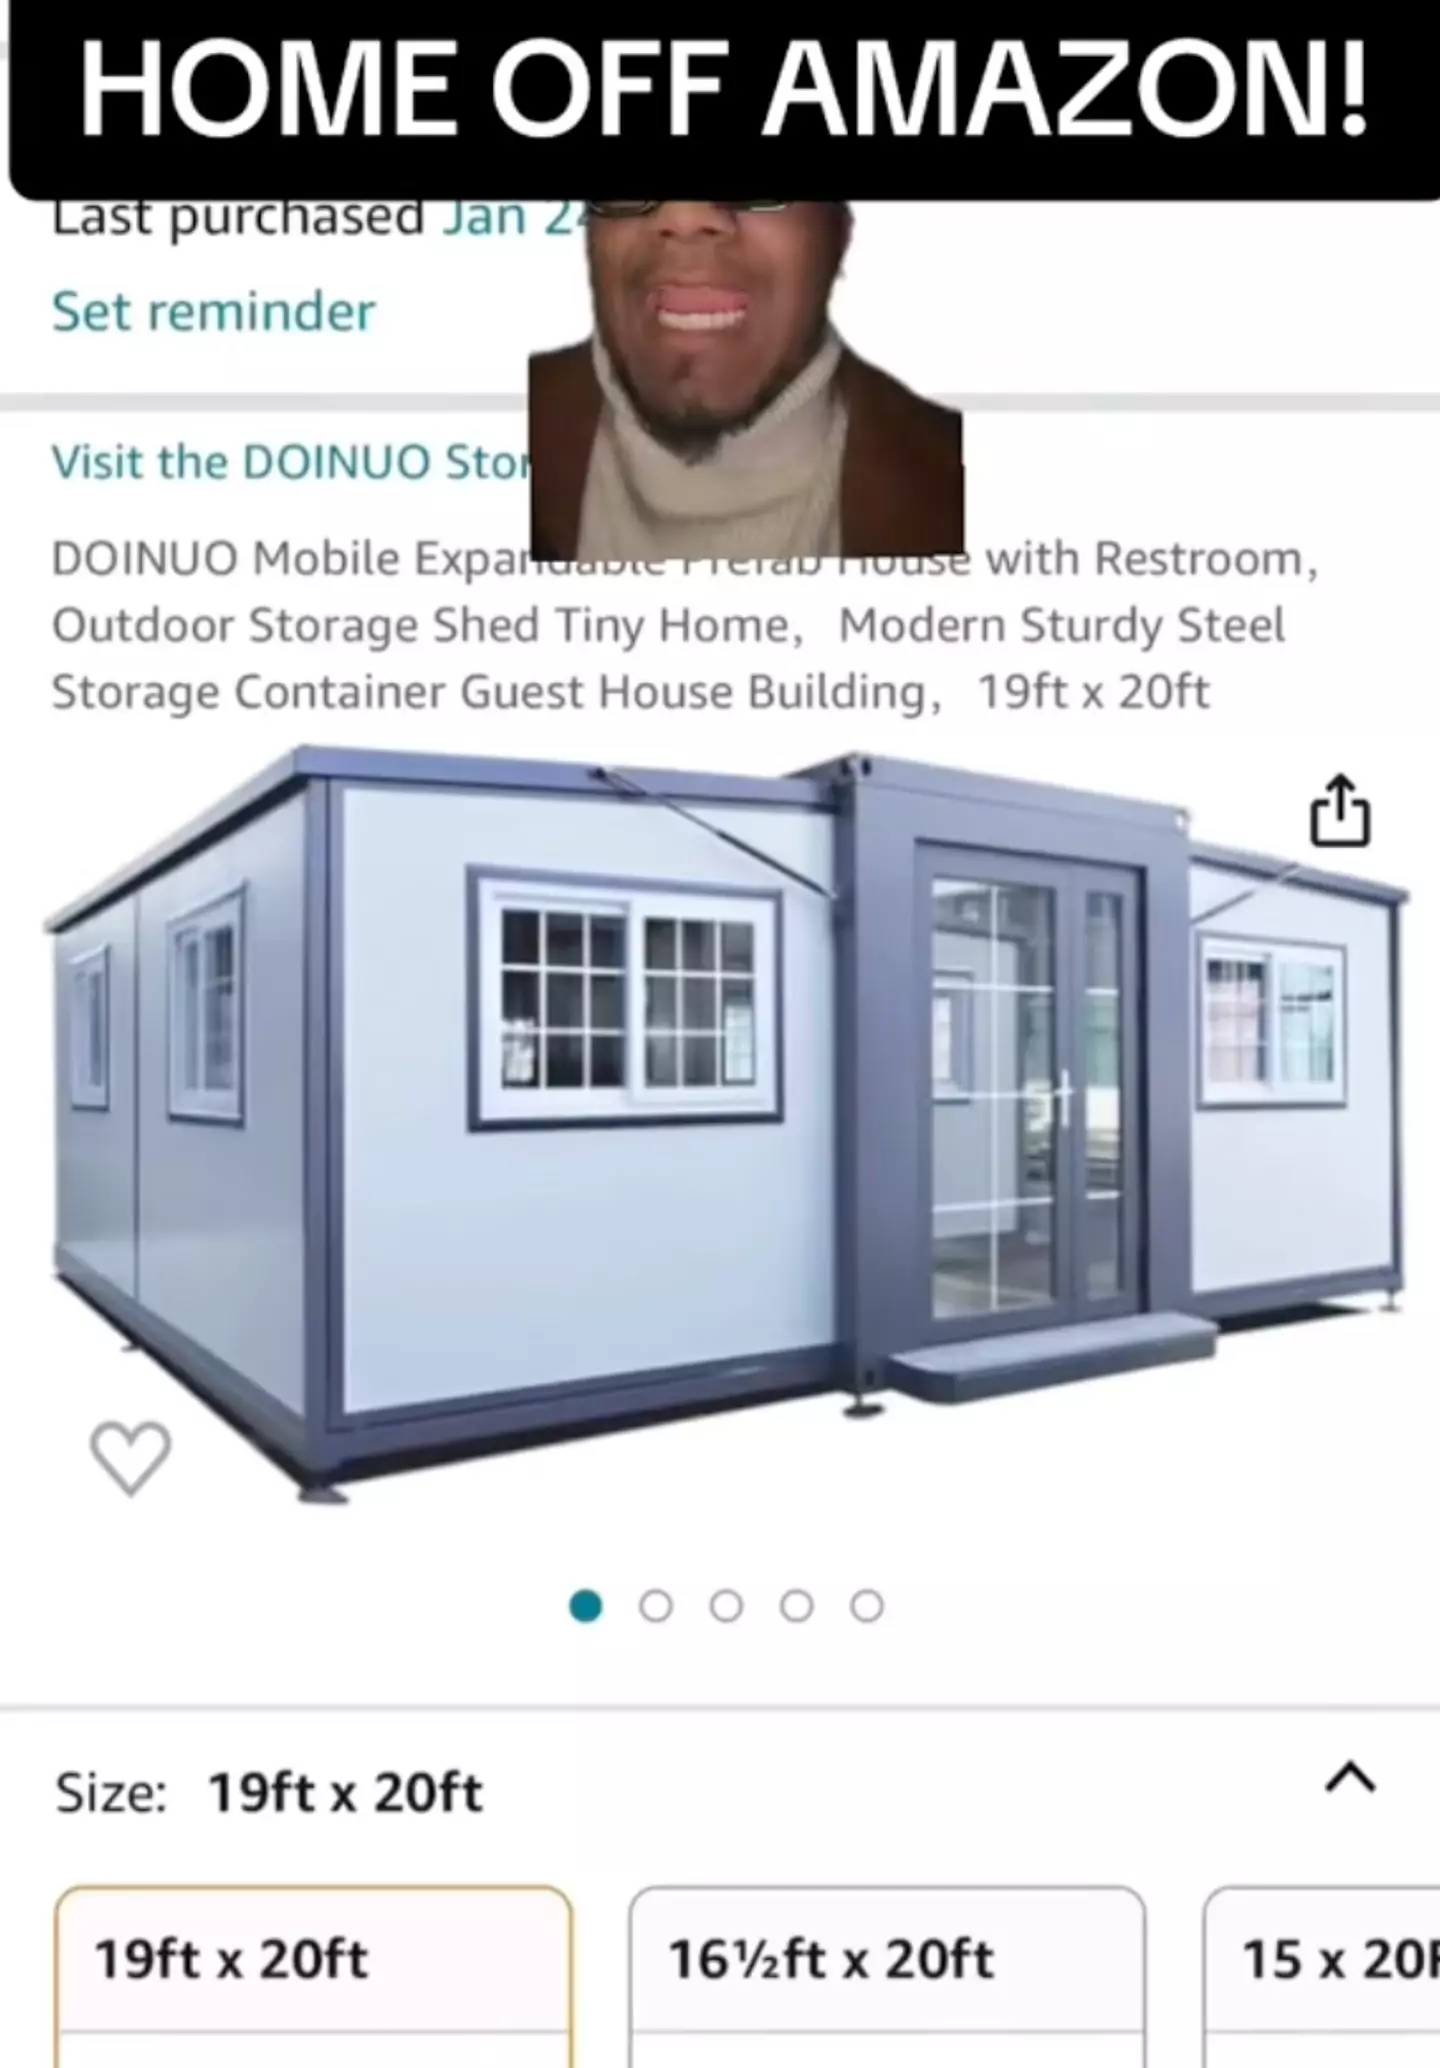 Would you buy a mobile home off Amazon?